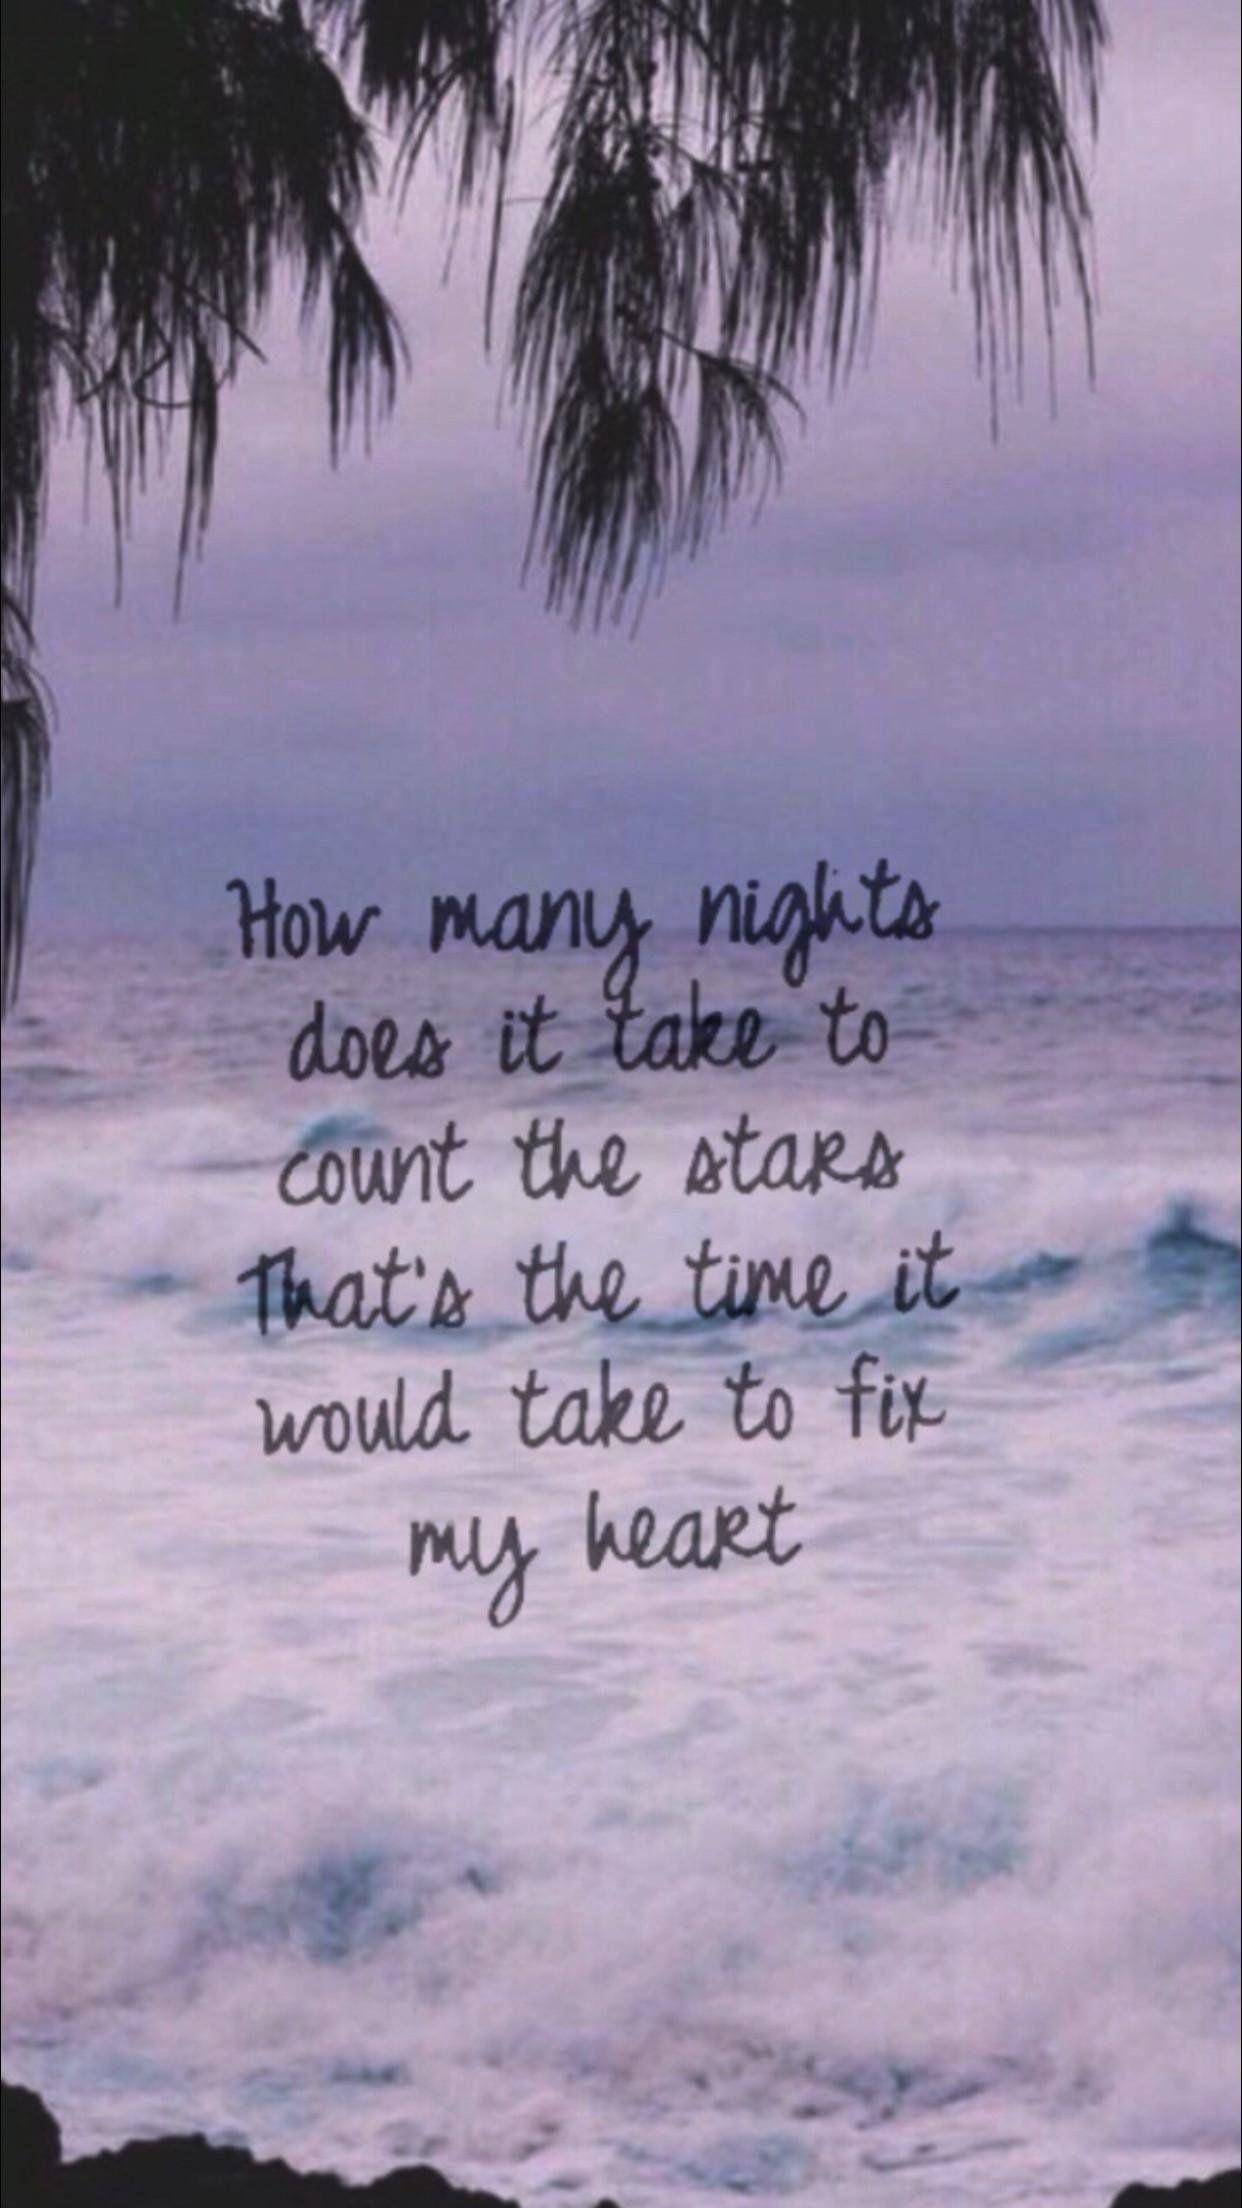 One Direction Lyric Wallpapers Top Free One Direction Lyric Backgrounds Wallpaperaccess Download hd wallpapers for free on unsplash. one direction lyric wallpapers top